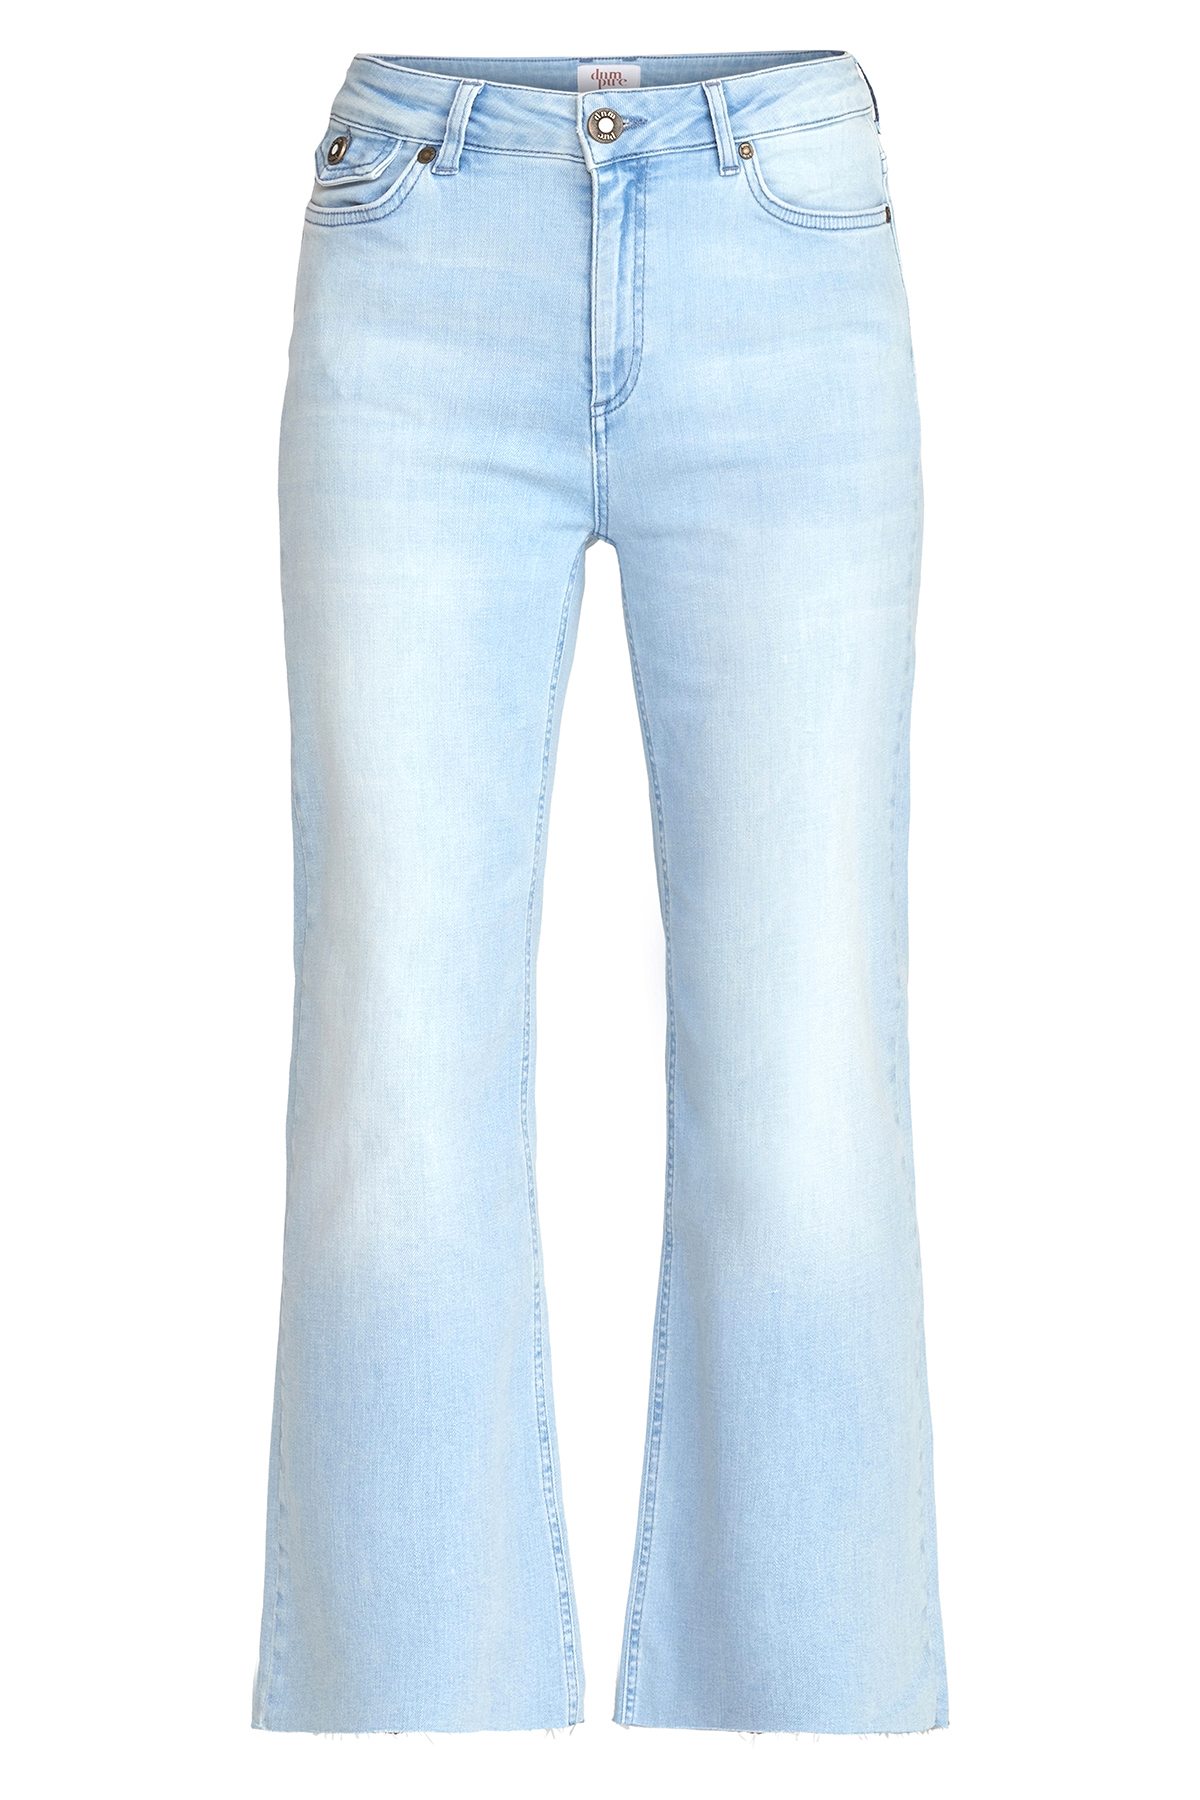 DNM PURE BY ZIZO Dames Jeans Holden Light Blue